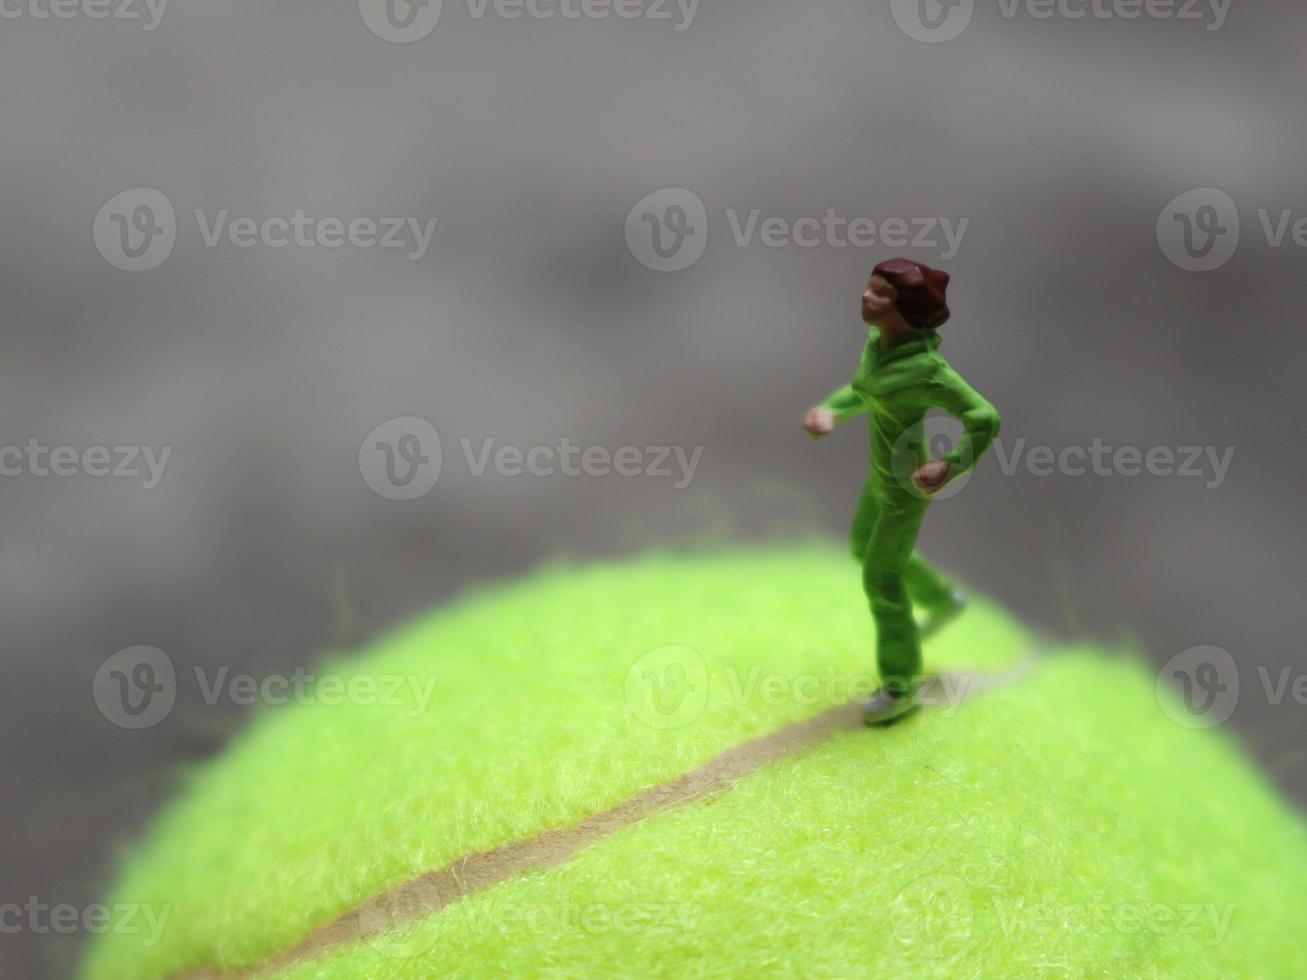 a close up of a miniature figure of a runner jogging on a baseball. sport photo concept.